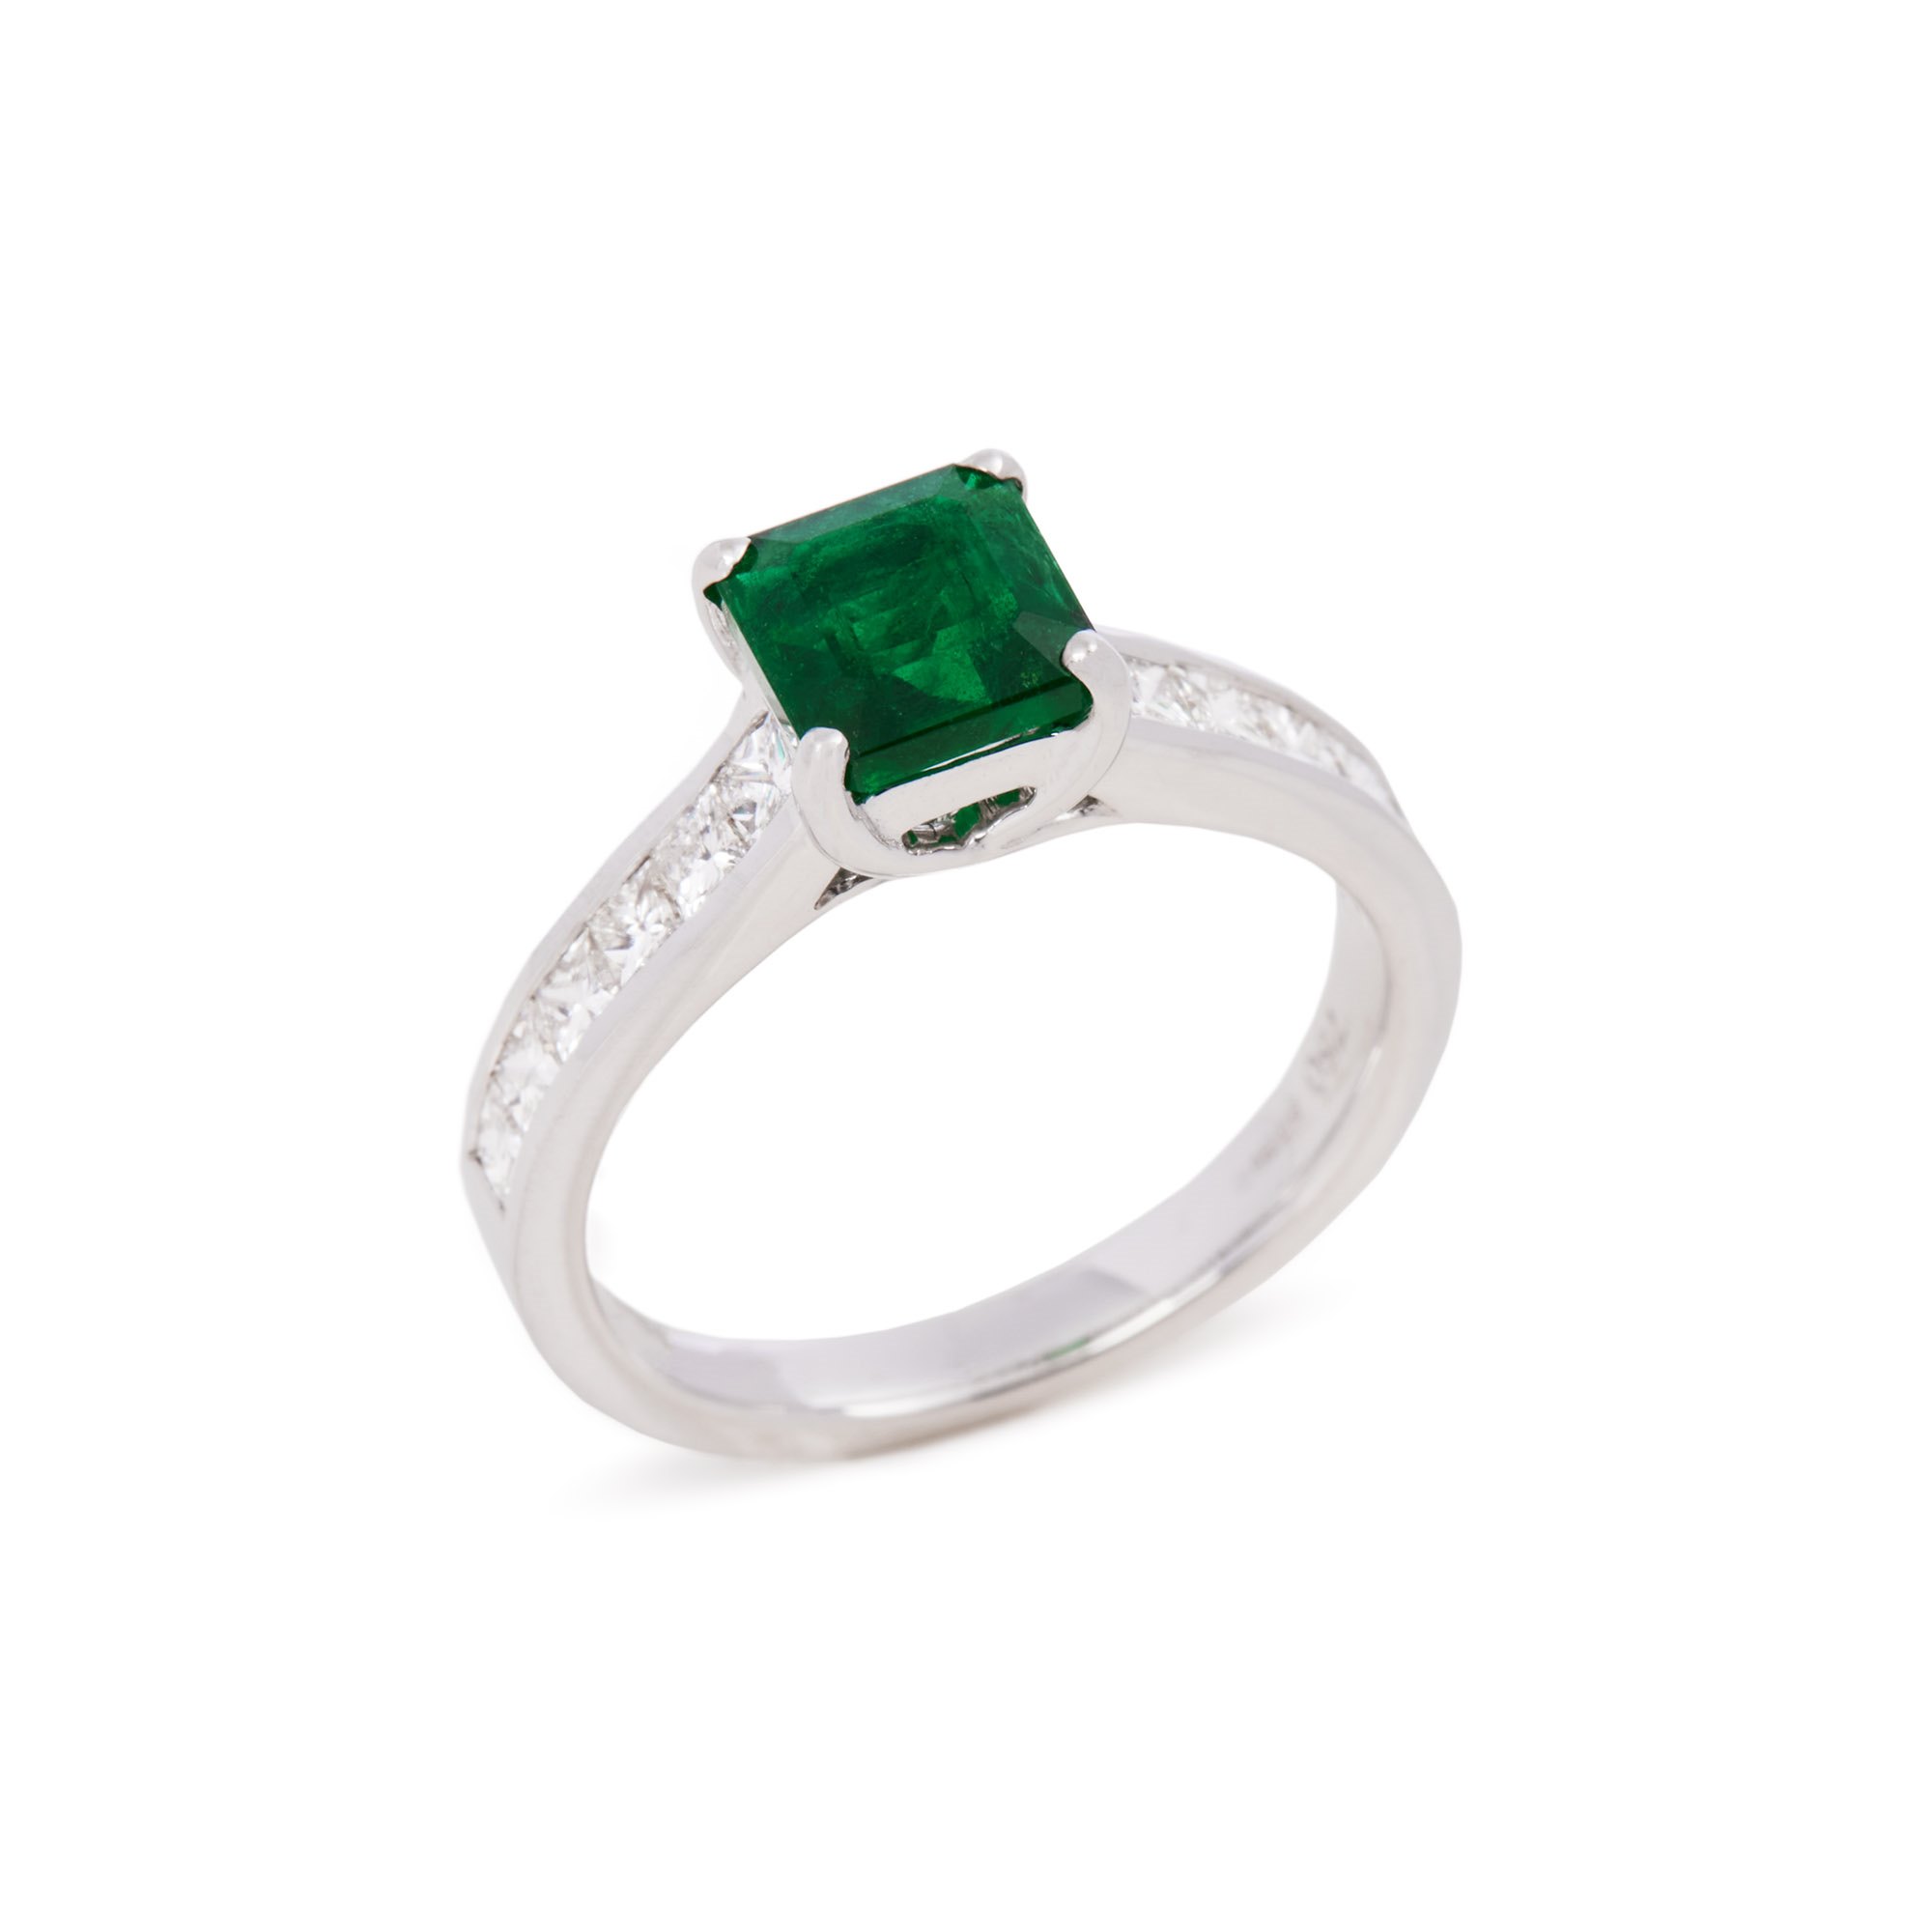 David Jerome Certified 1.15ct Square Cut Emerald and Diamond Ring